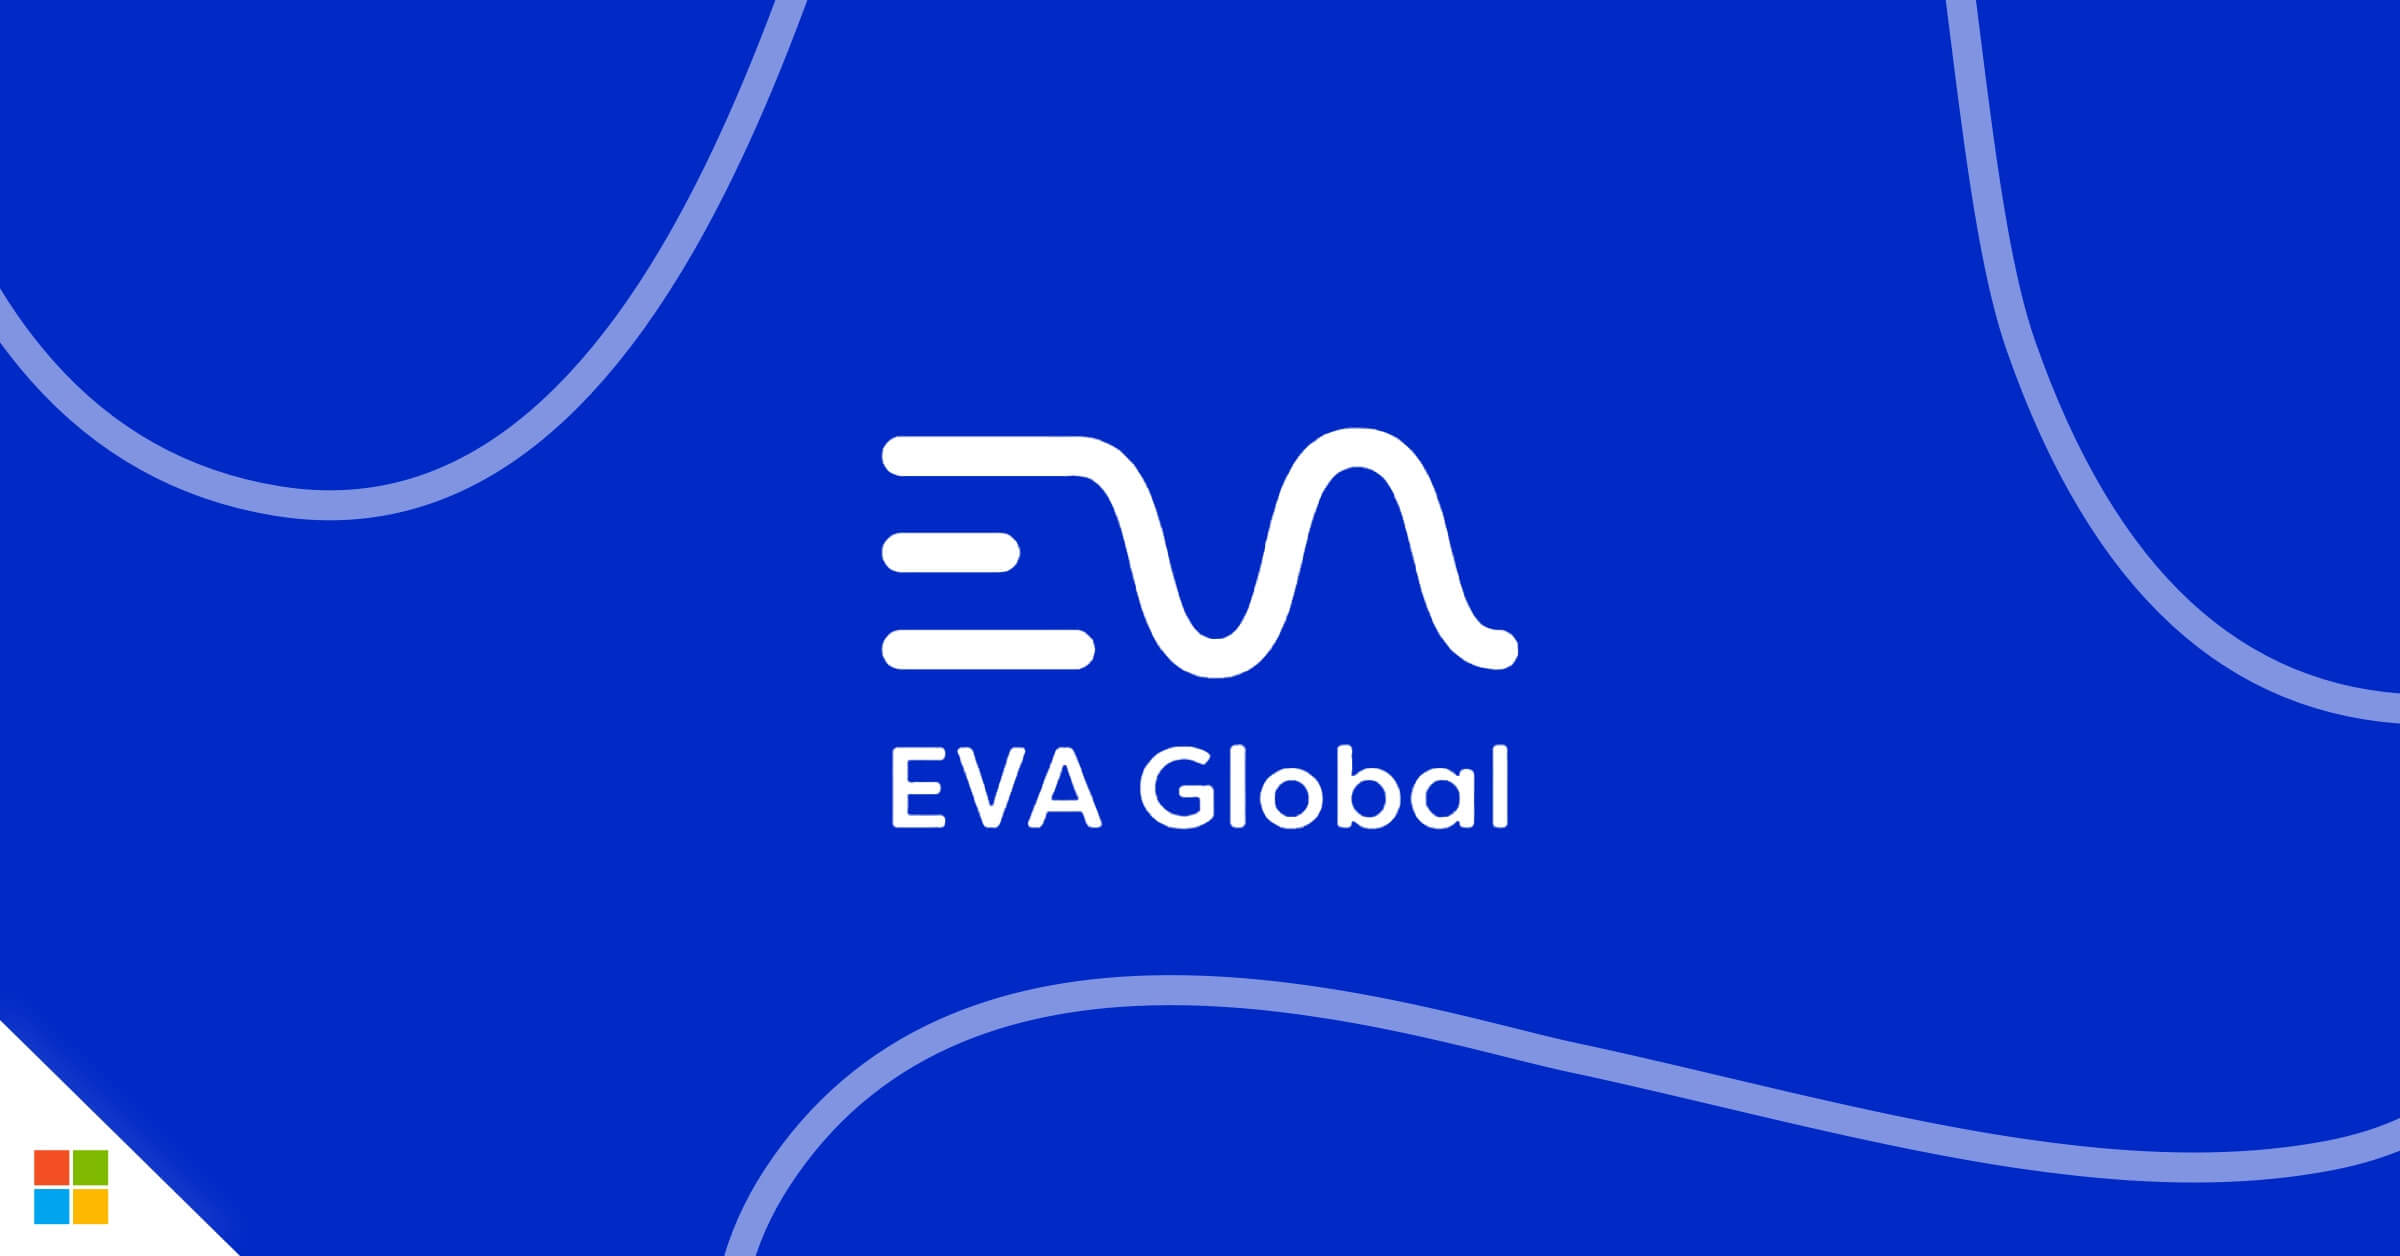 Why EVA Global chose Happeo as their Microsoft 365-integrated social intranet